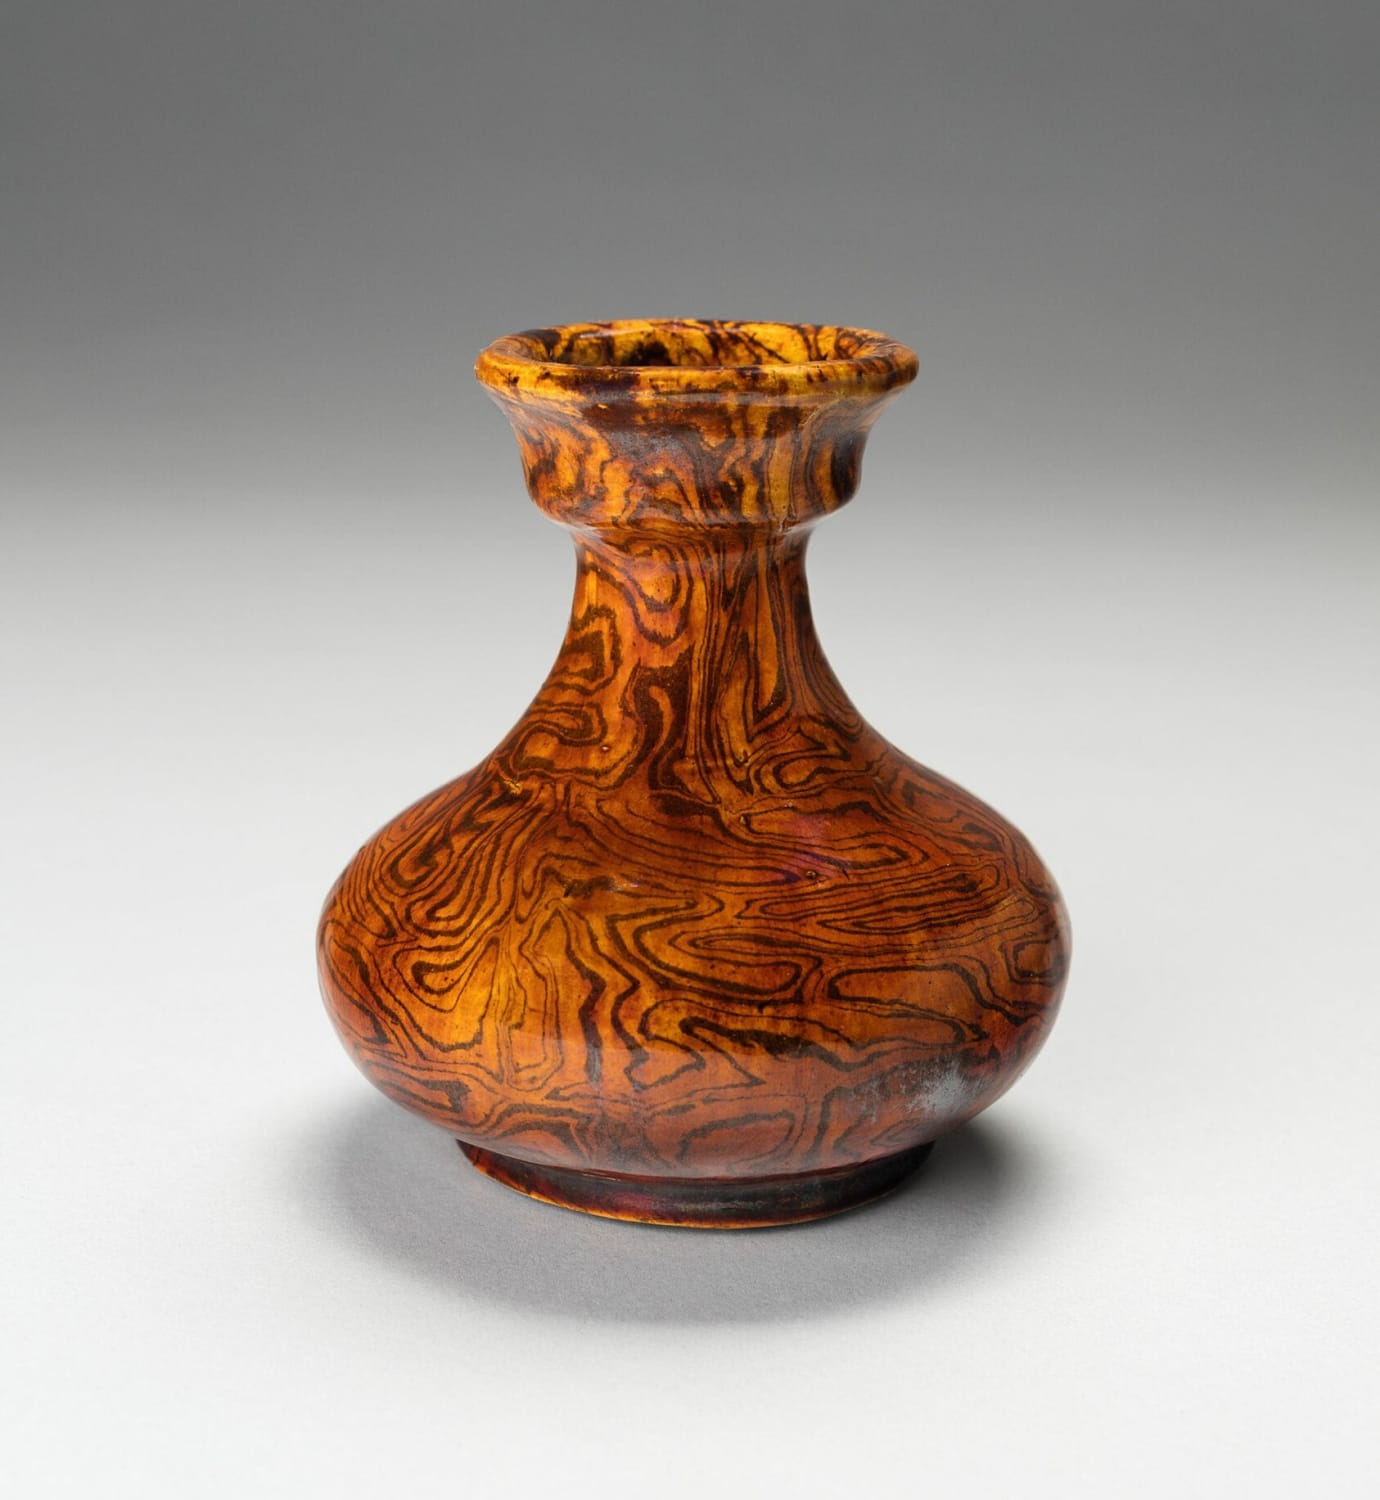 Marbled jar with amber glaze. China, Tang dynasty [OS]